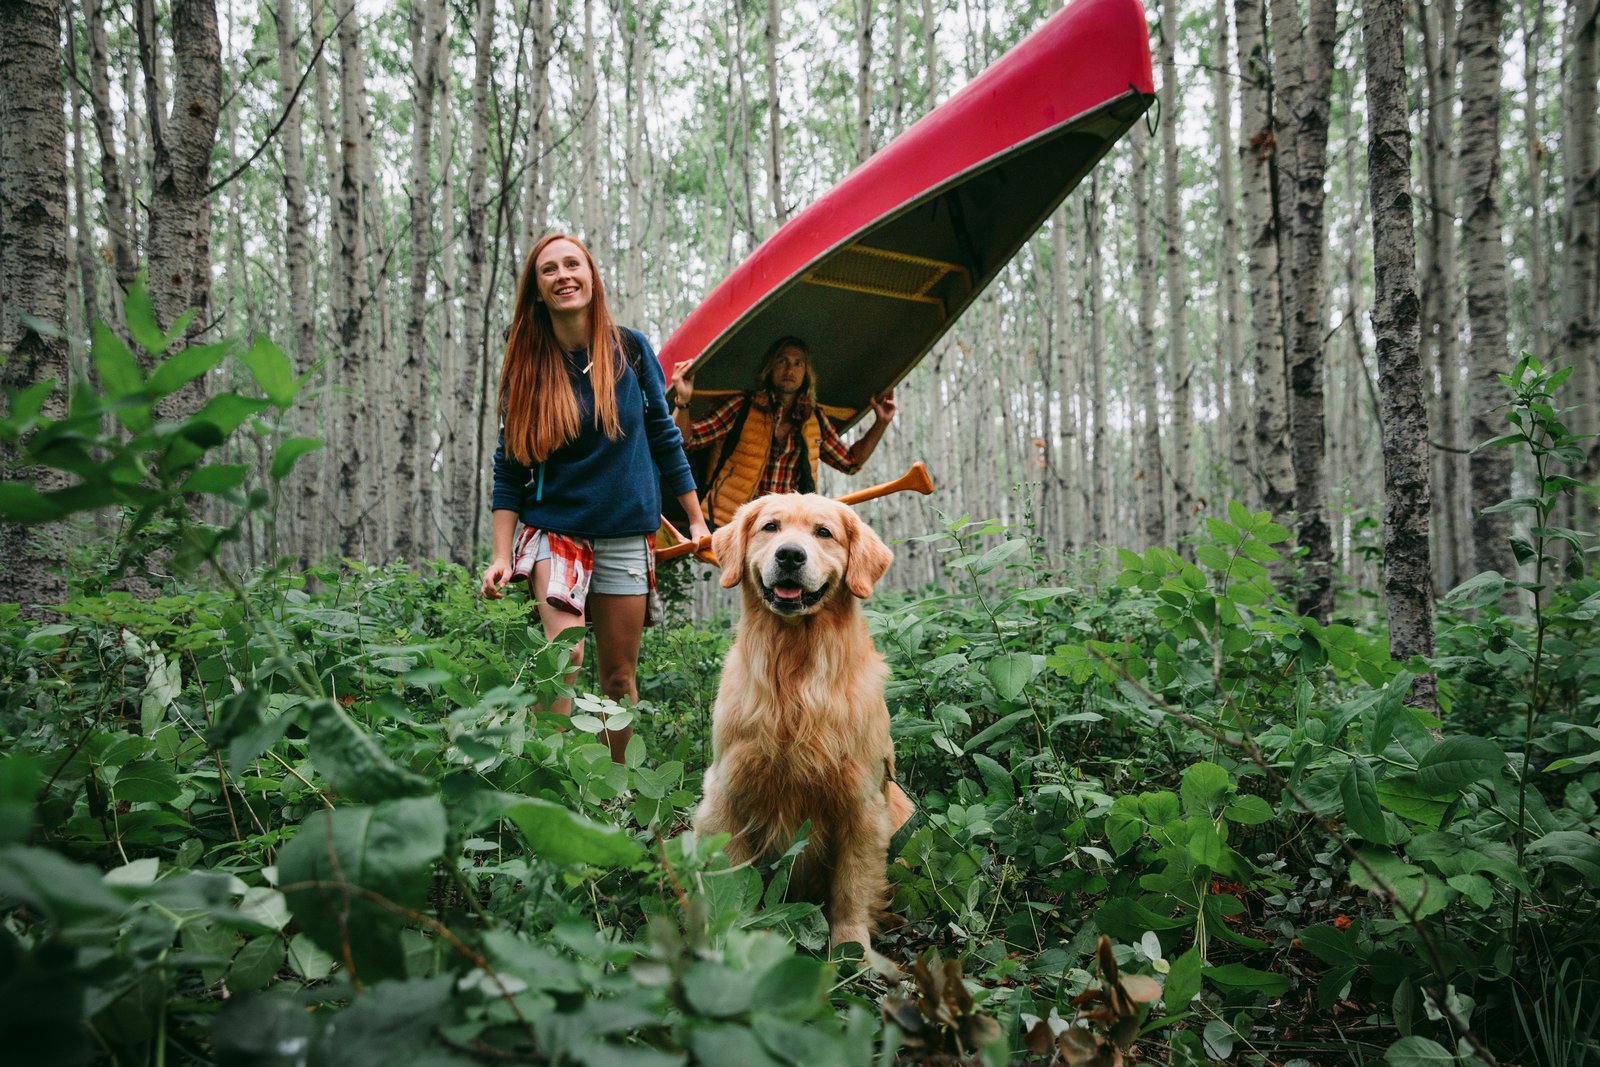 Friends hiking in the woods with a golden retriever, carrying a red canoe.